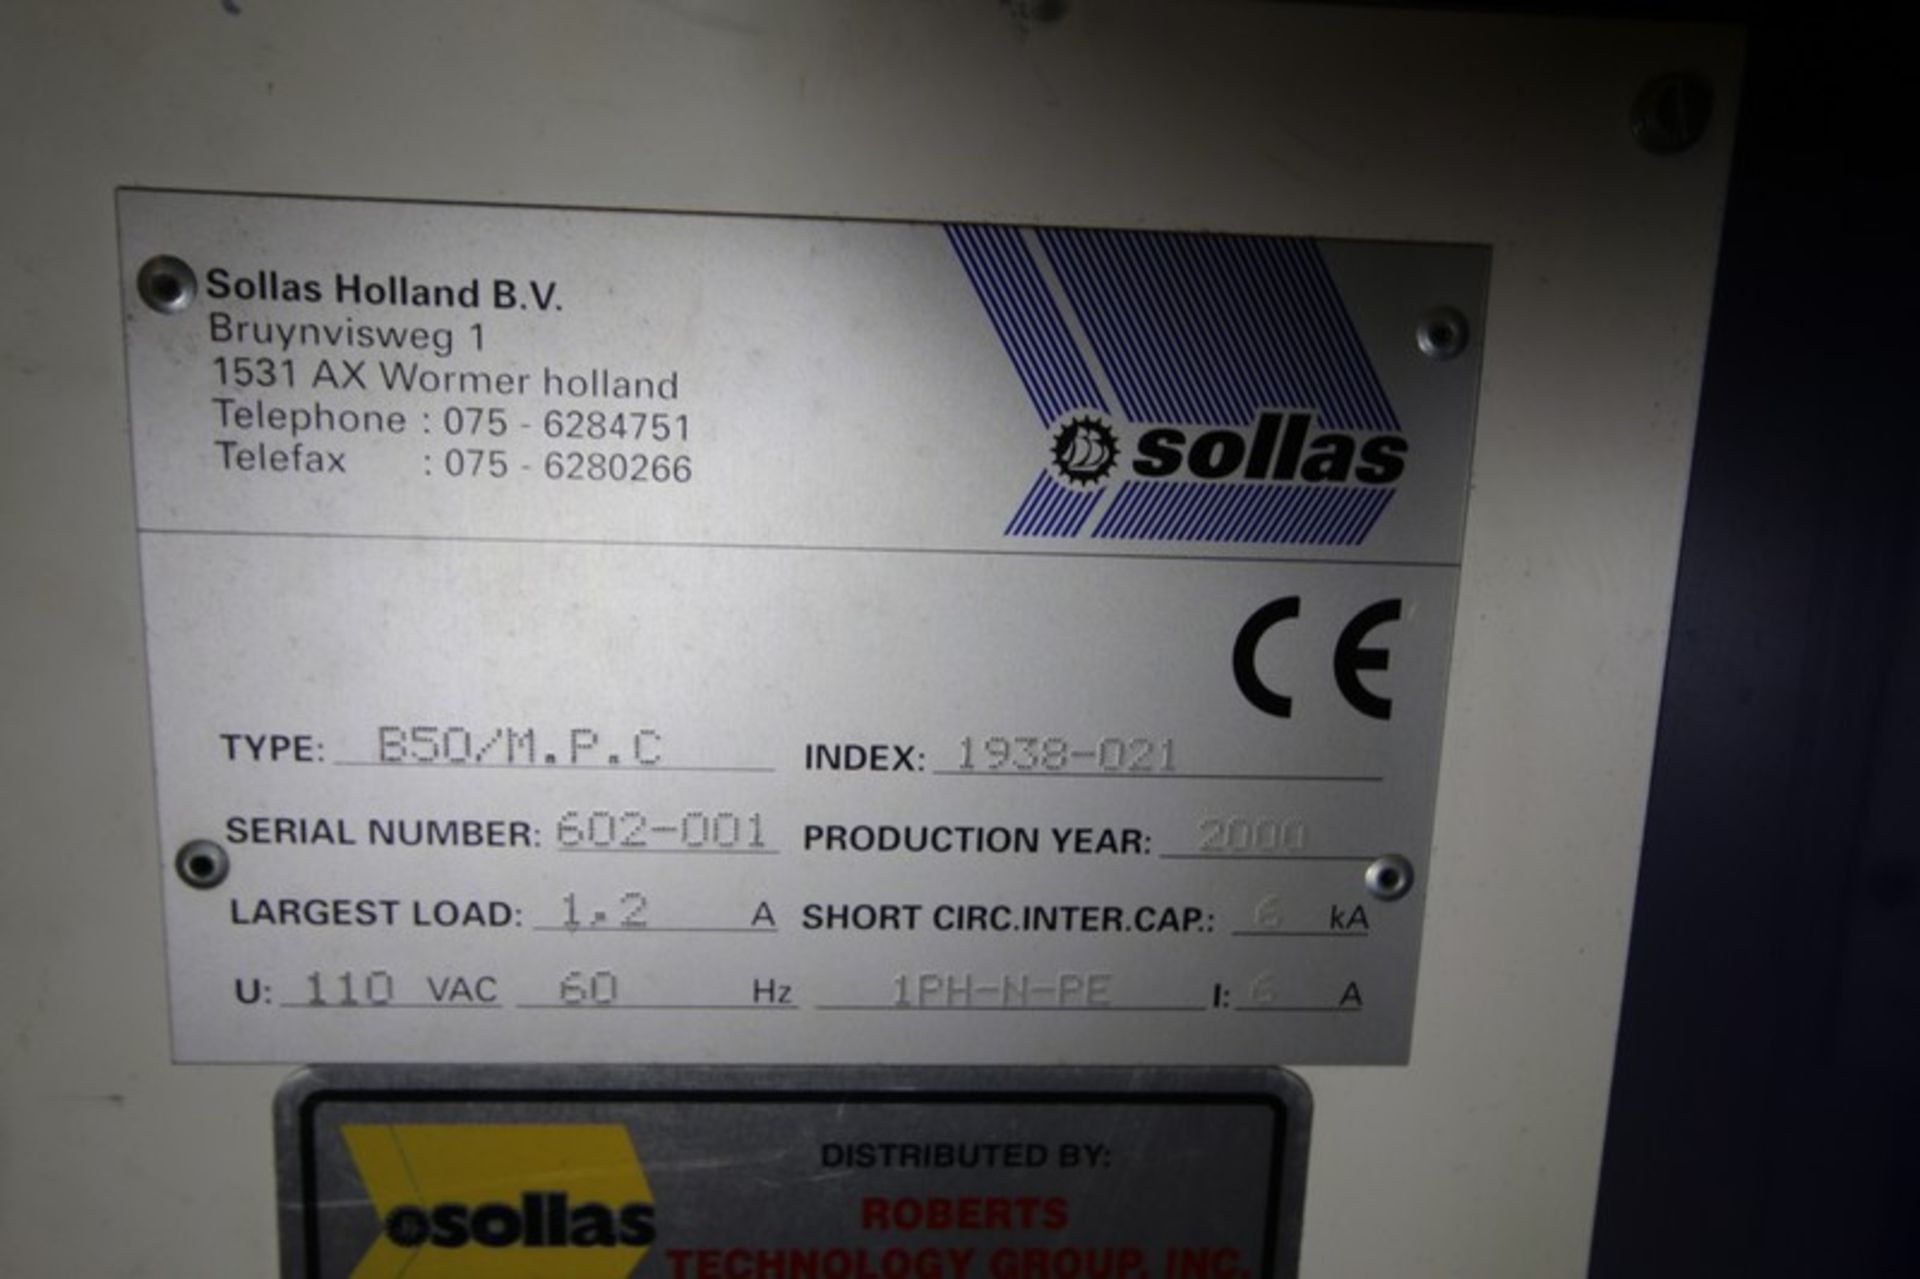 Sollas Portable Banding Machine, Type B50 / M.P.C., SN 602-001, 110V, with Foot Controller (INV# - Image 8 of 8